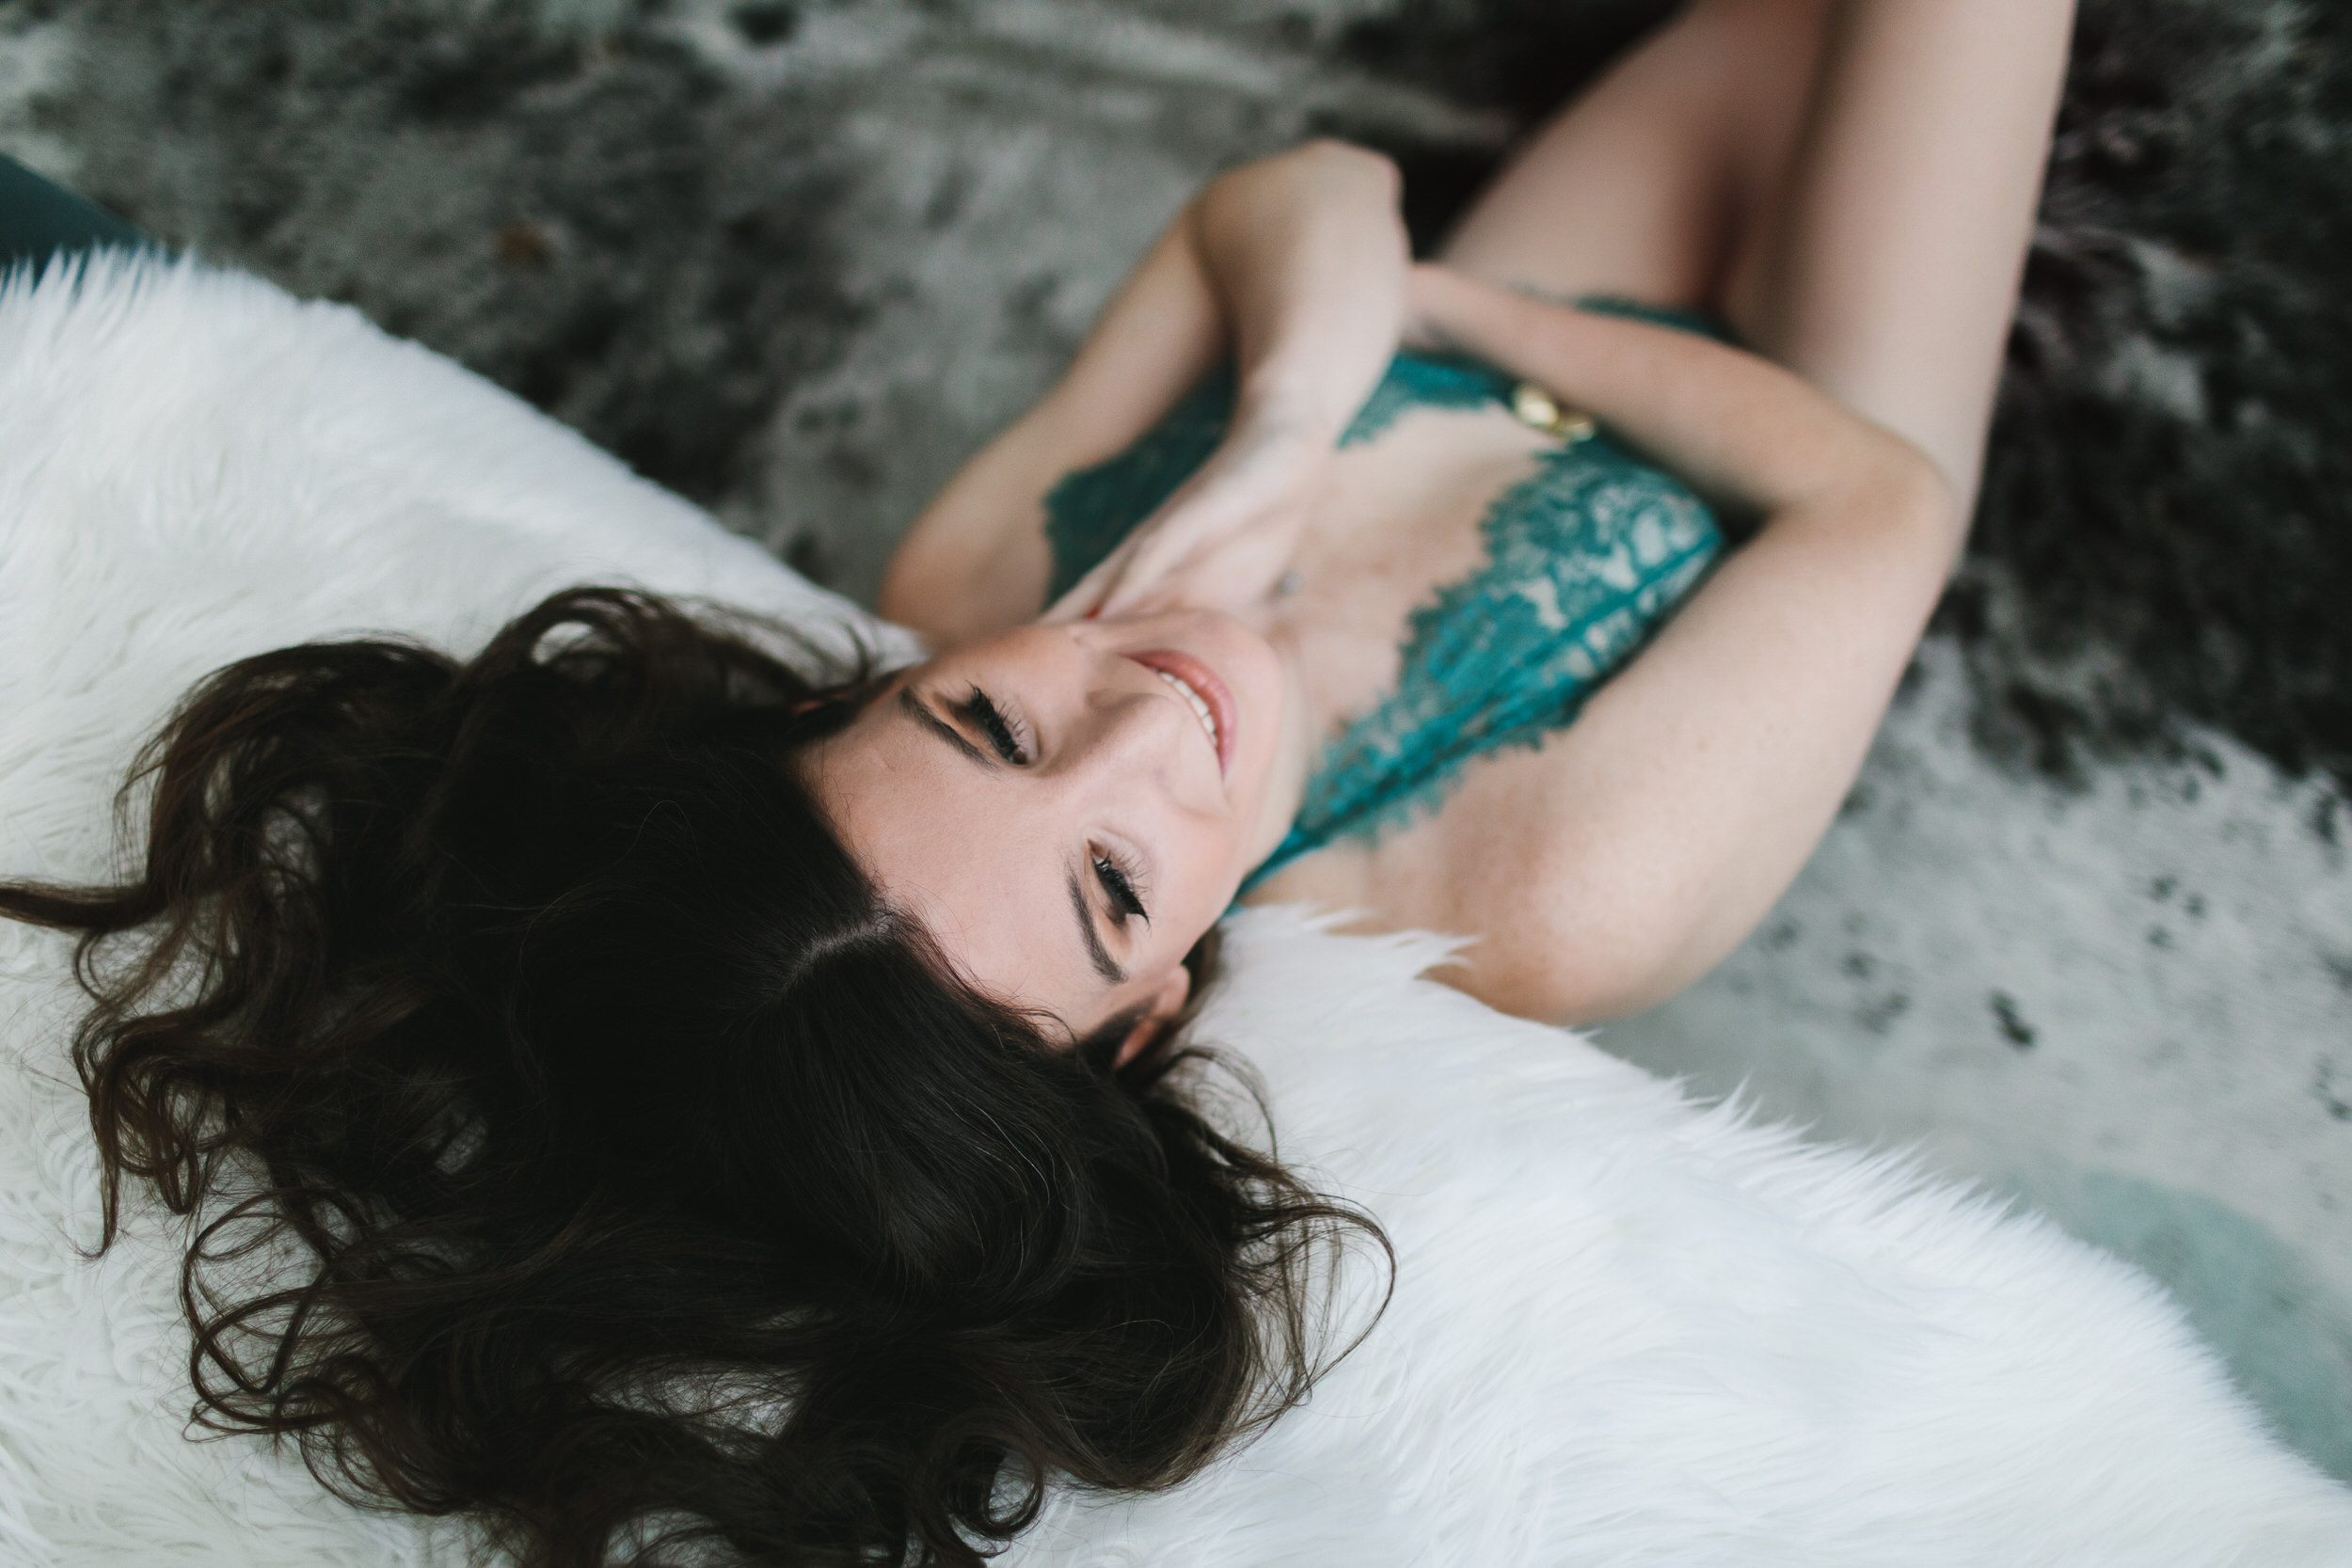 Woman in teal lingerie on white fur-lined sofa; embrace yourself through boudoir photography by Lindsay Hite